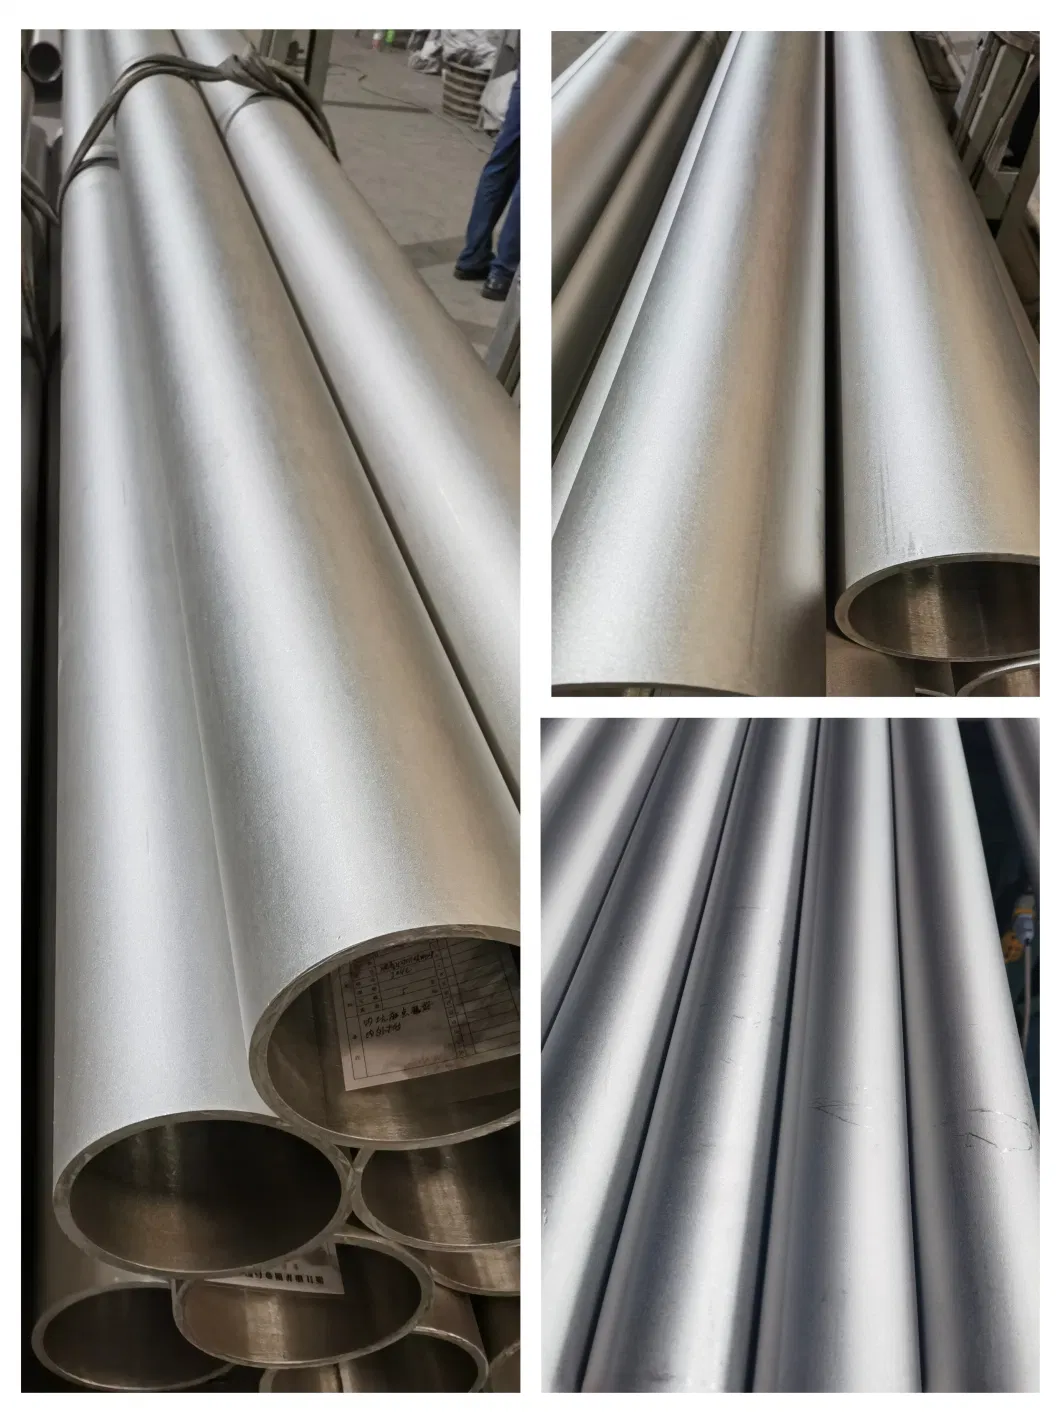 ASTM/AISI/JIS/DIN/GB Mirror/Polished Alloy Steel China Pipe Duplex 2205 Steel Coil/Tube Surface Treatment